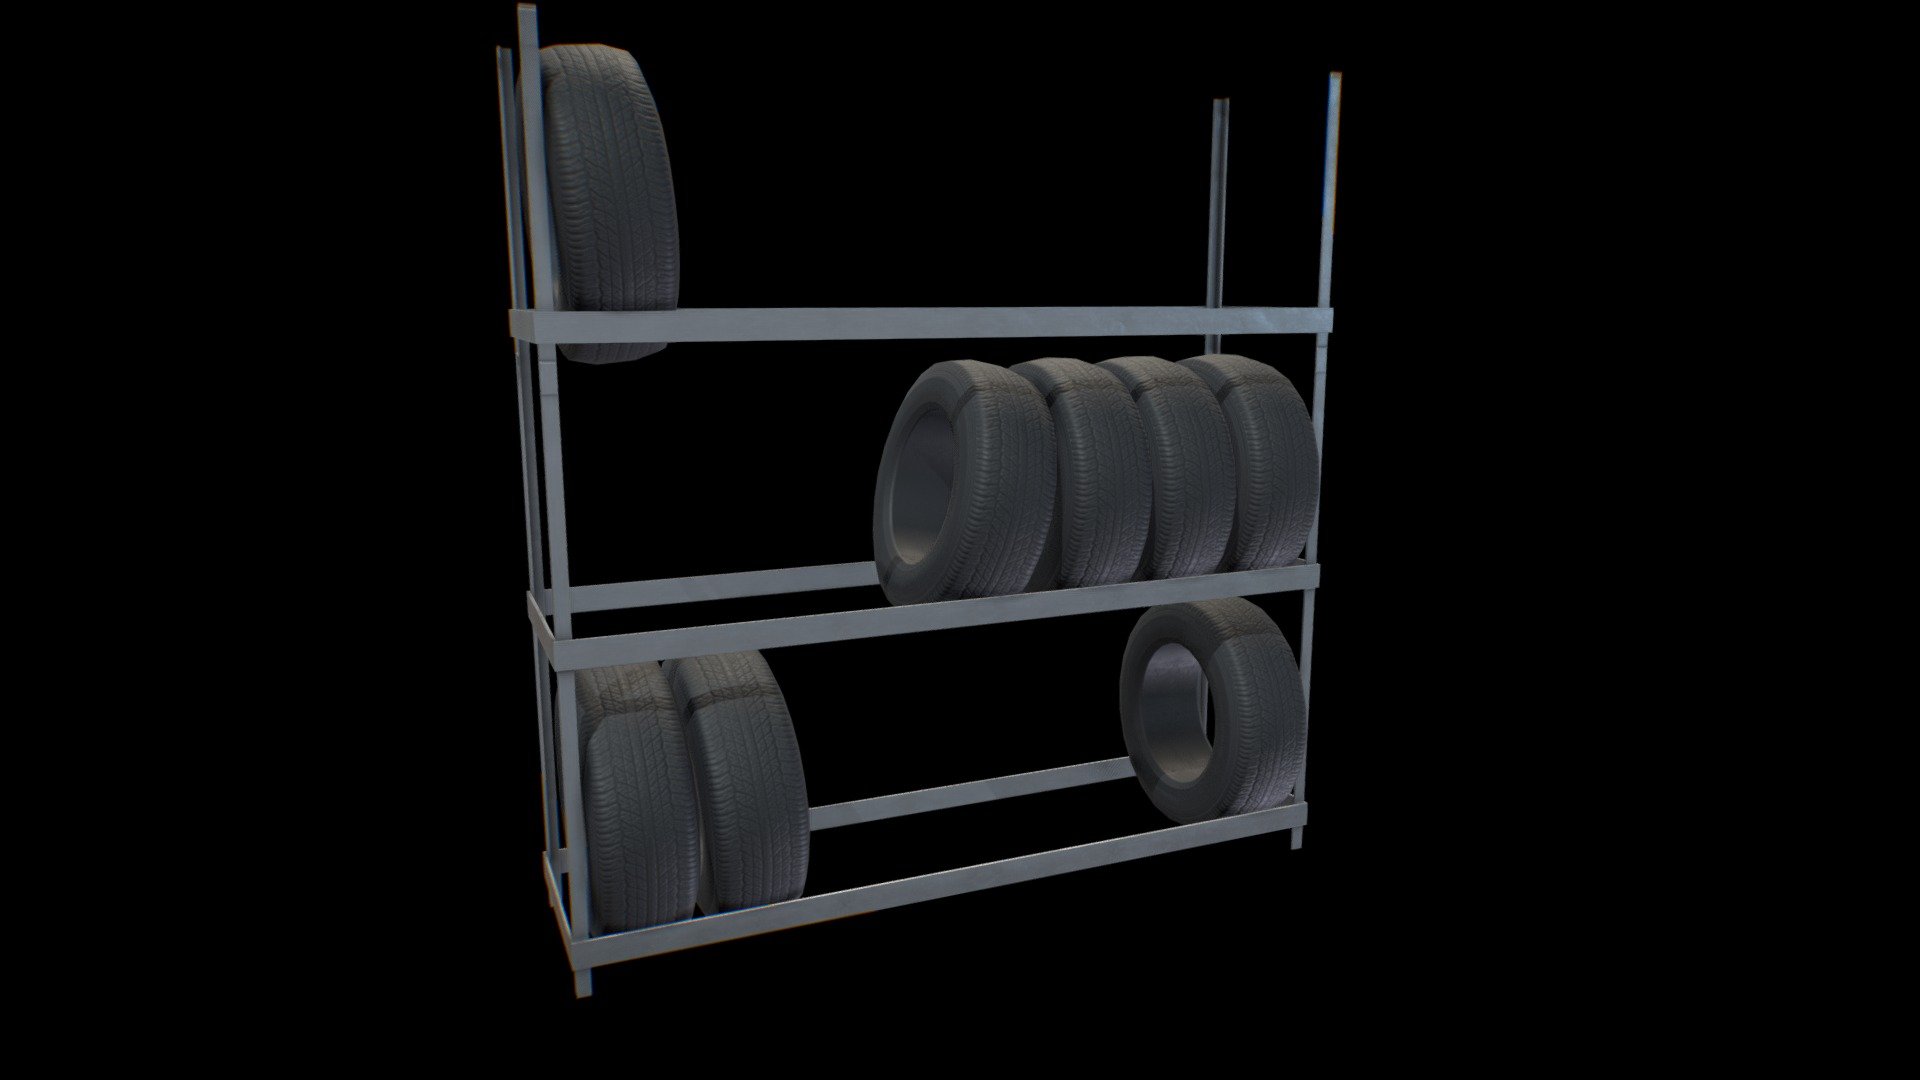 If my free models are useful for your projects please consider liking my paid models too. The more models I can sell, the more free models I will be able to upload here so it’s a win/win!

A tire rack you can use for your personal and comercial projects 3d model